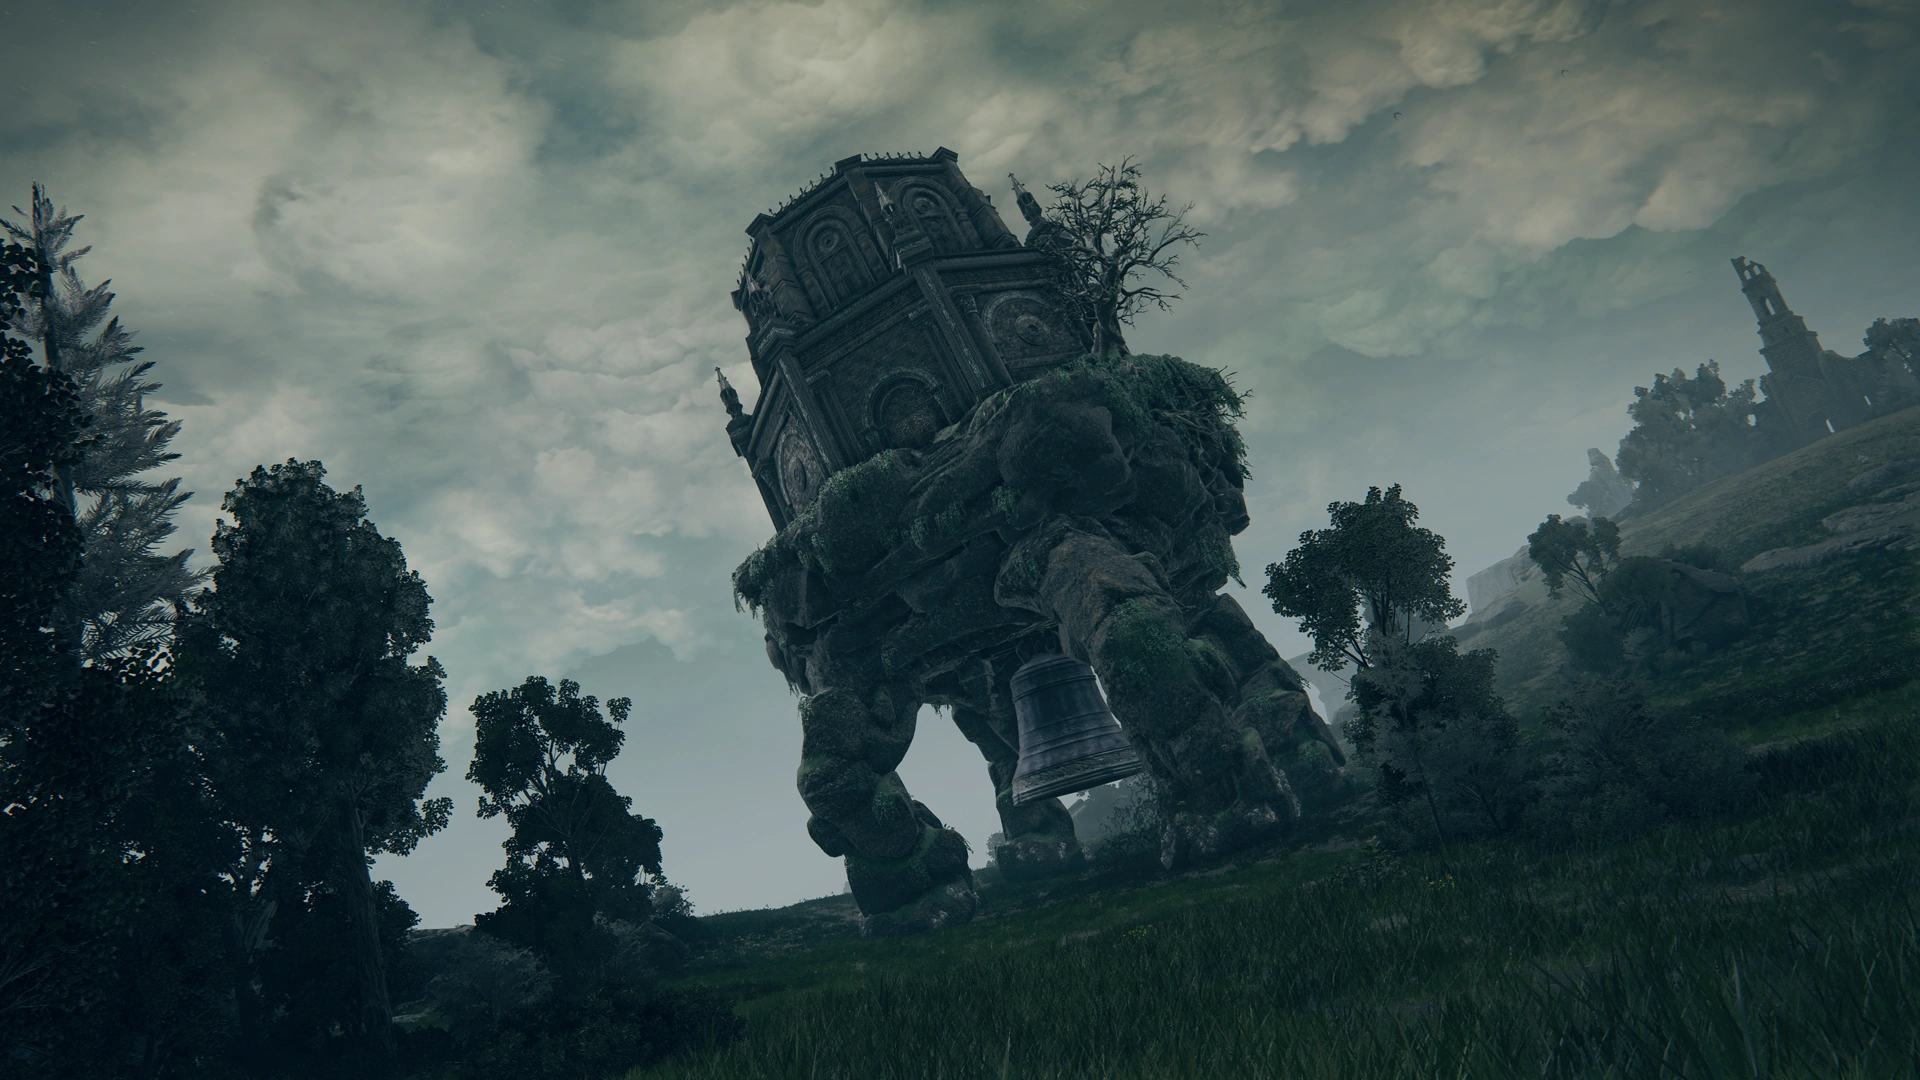 Elden Ring meets Shadow Of The Colossus in this stunning new RPG